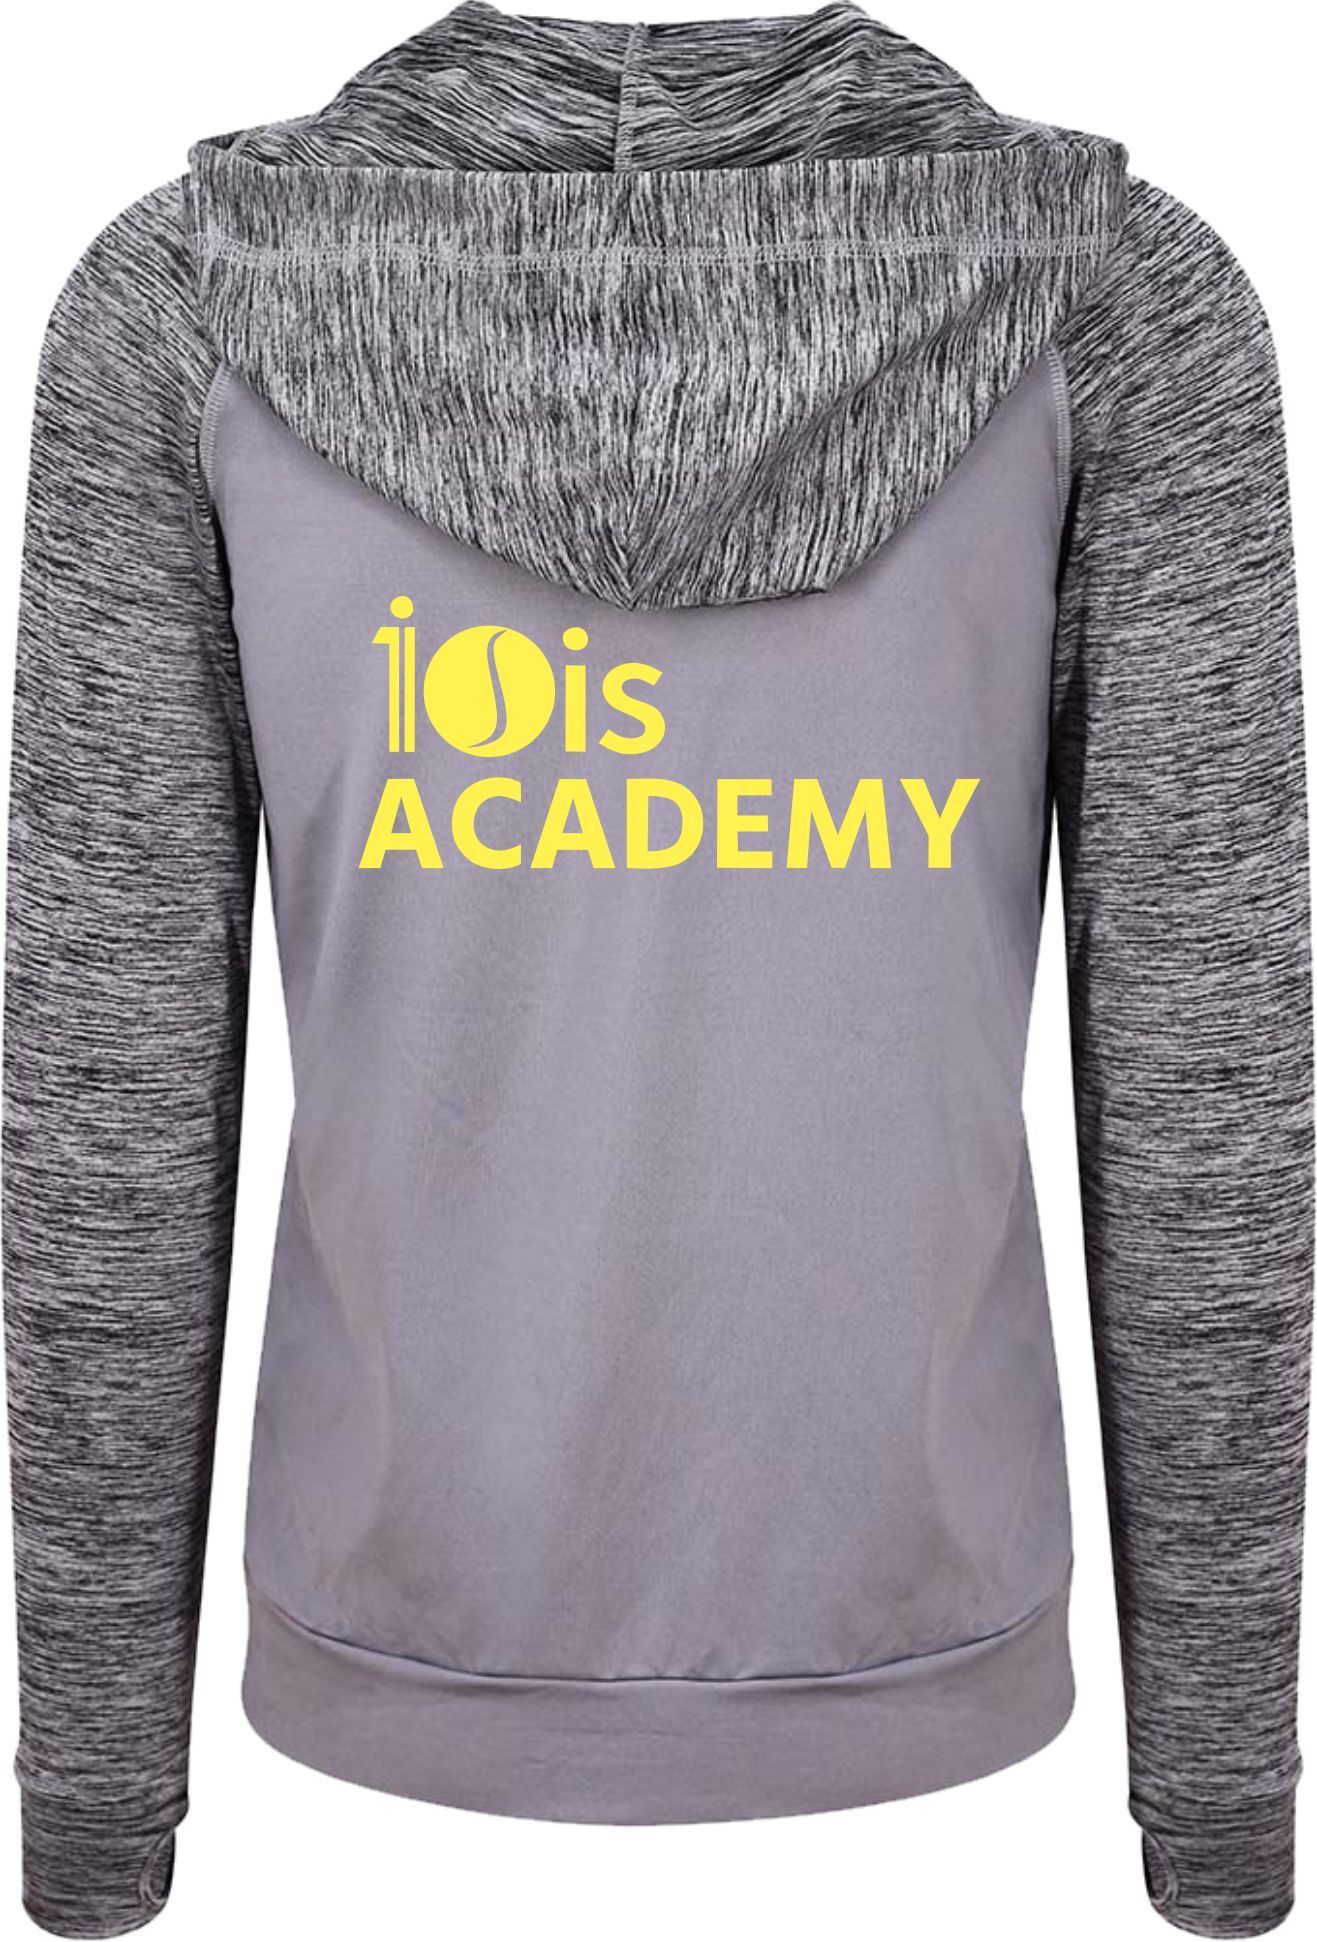 10is Academy Cool Contrast Zoodie (unisex)